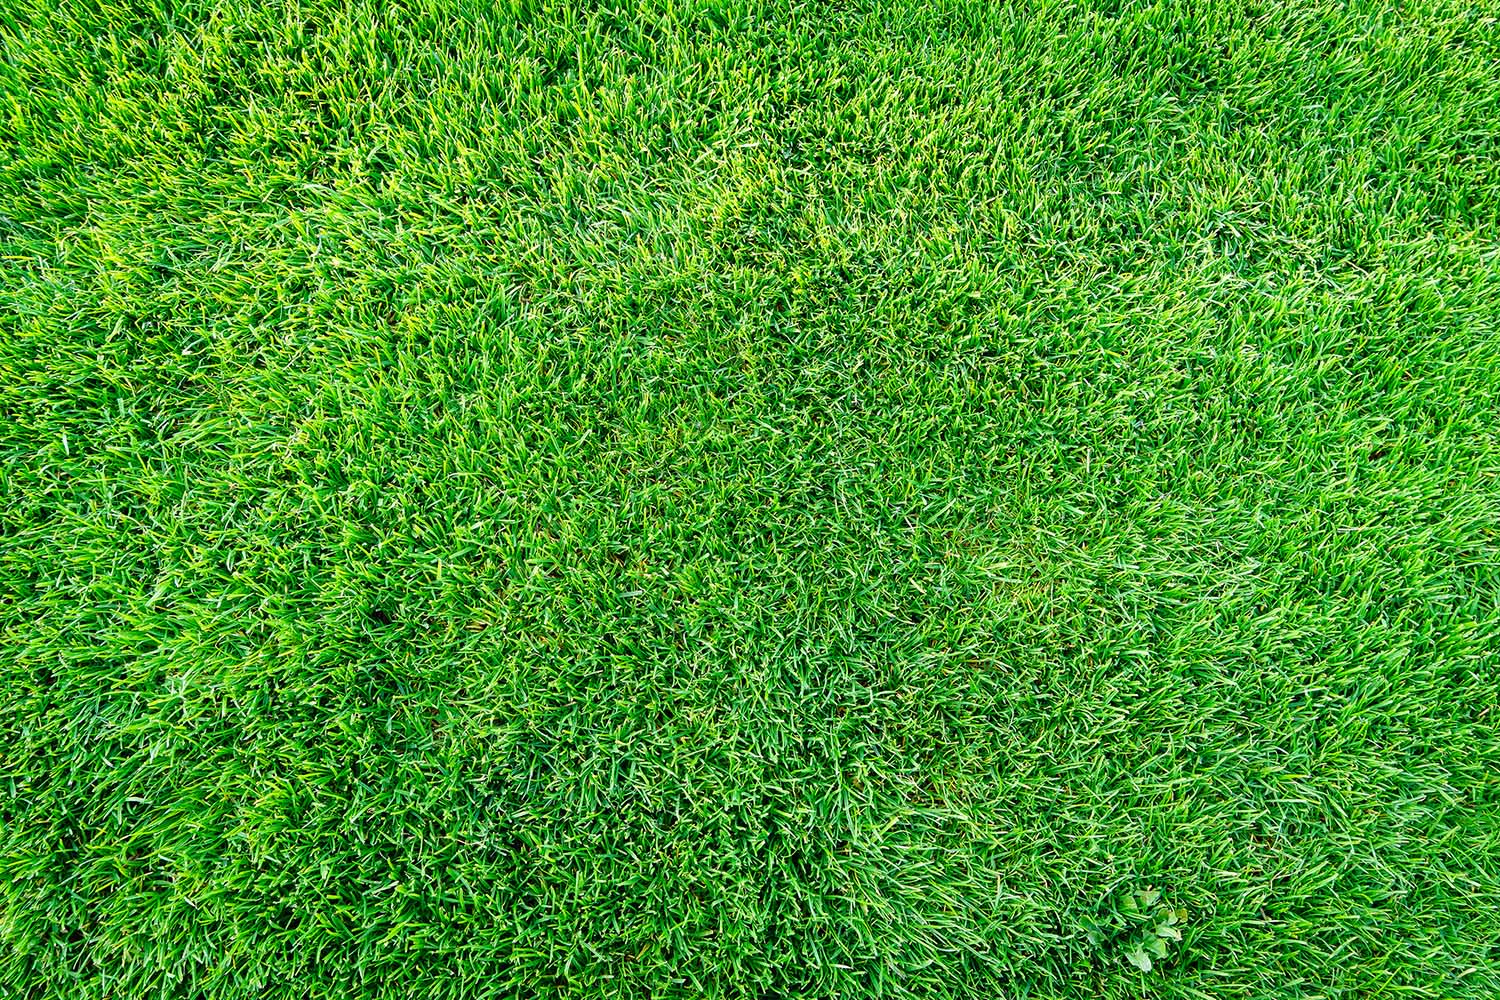 What’s the best grass to use in East Texas?